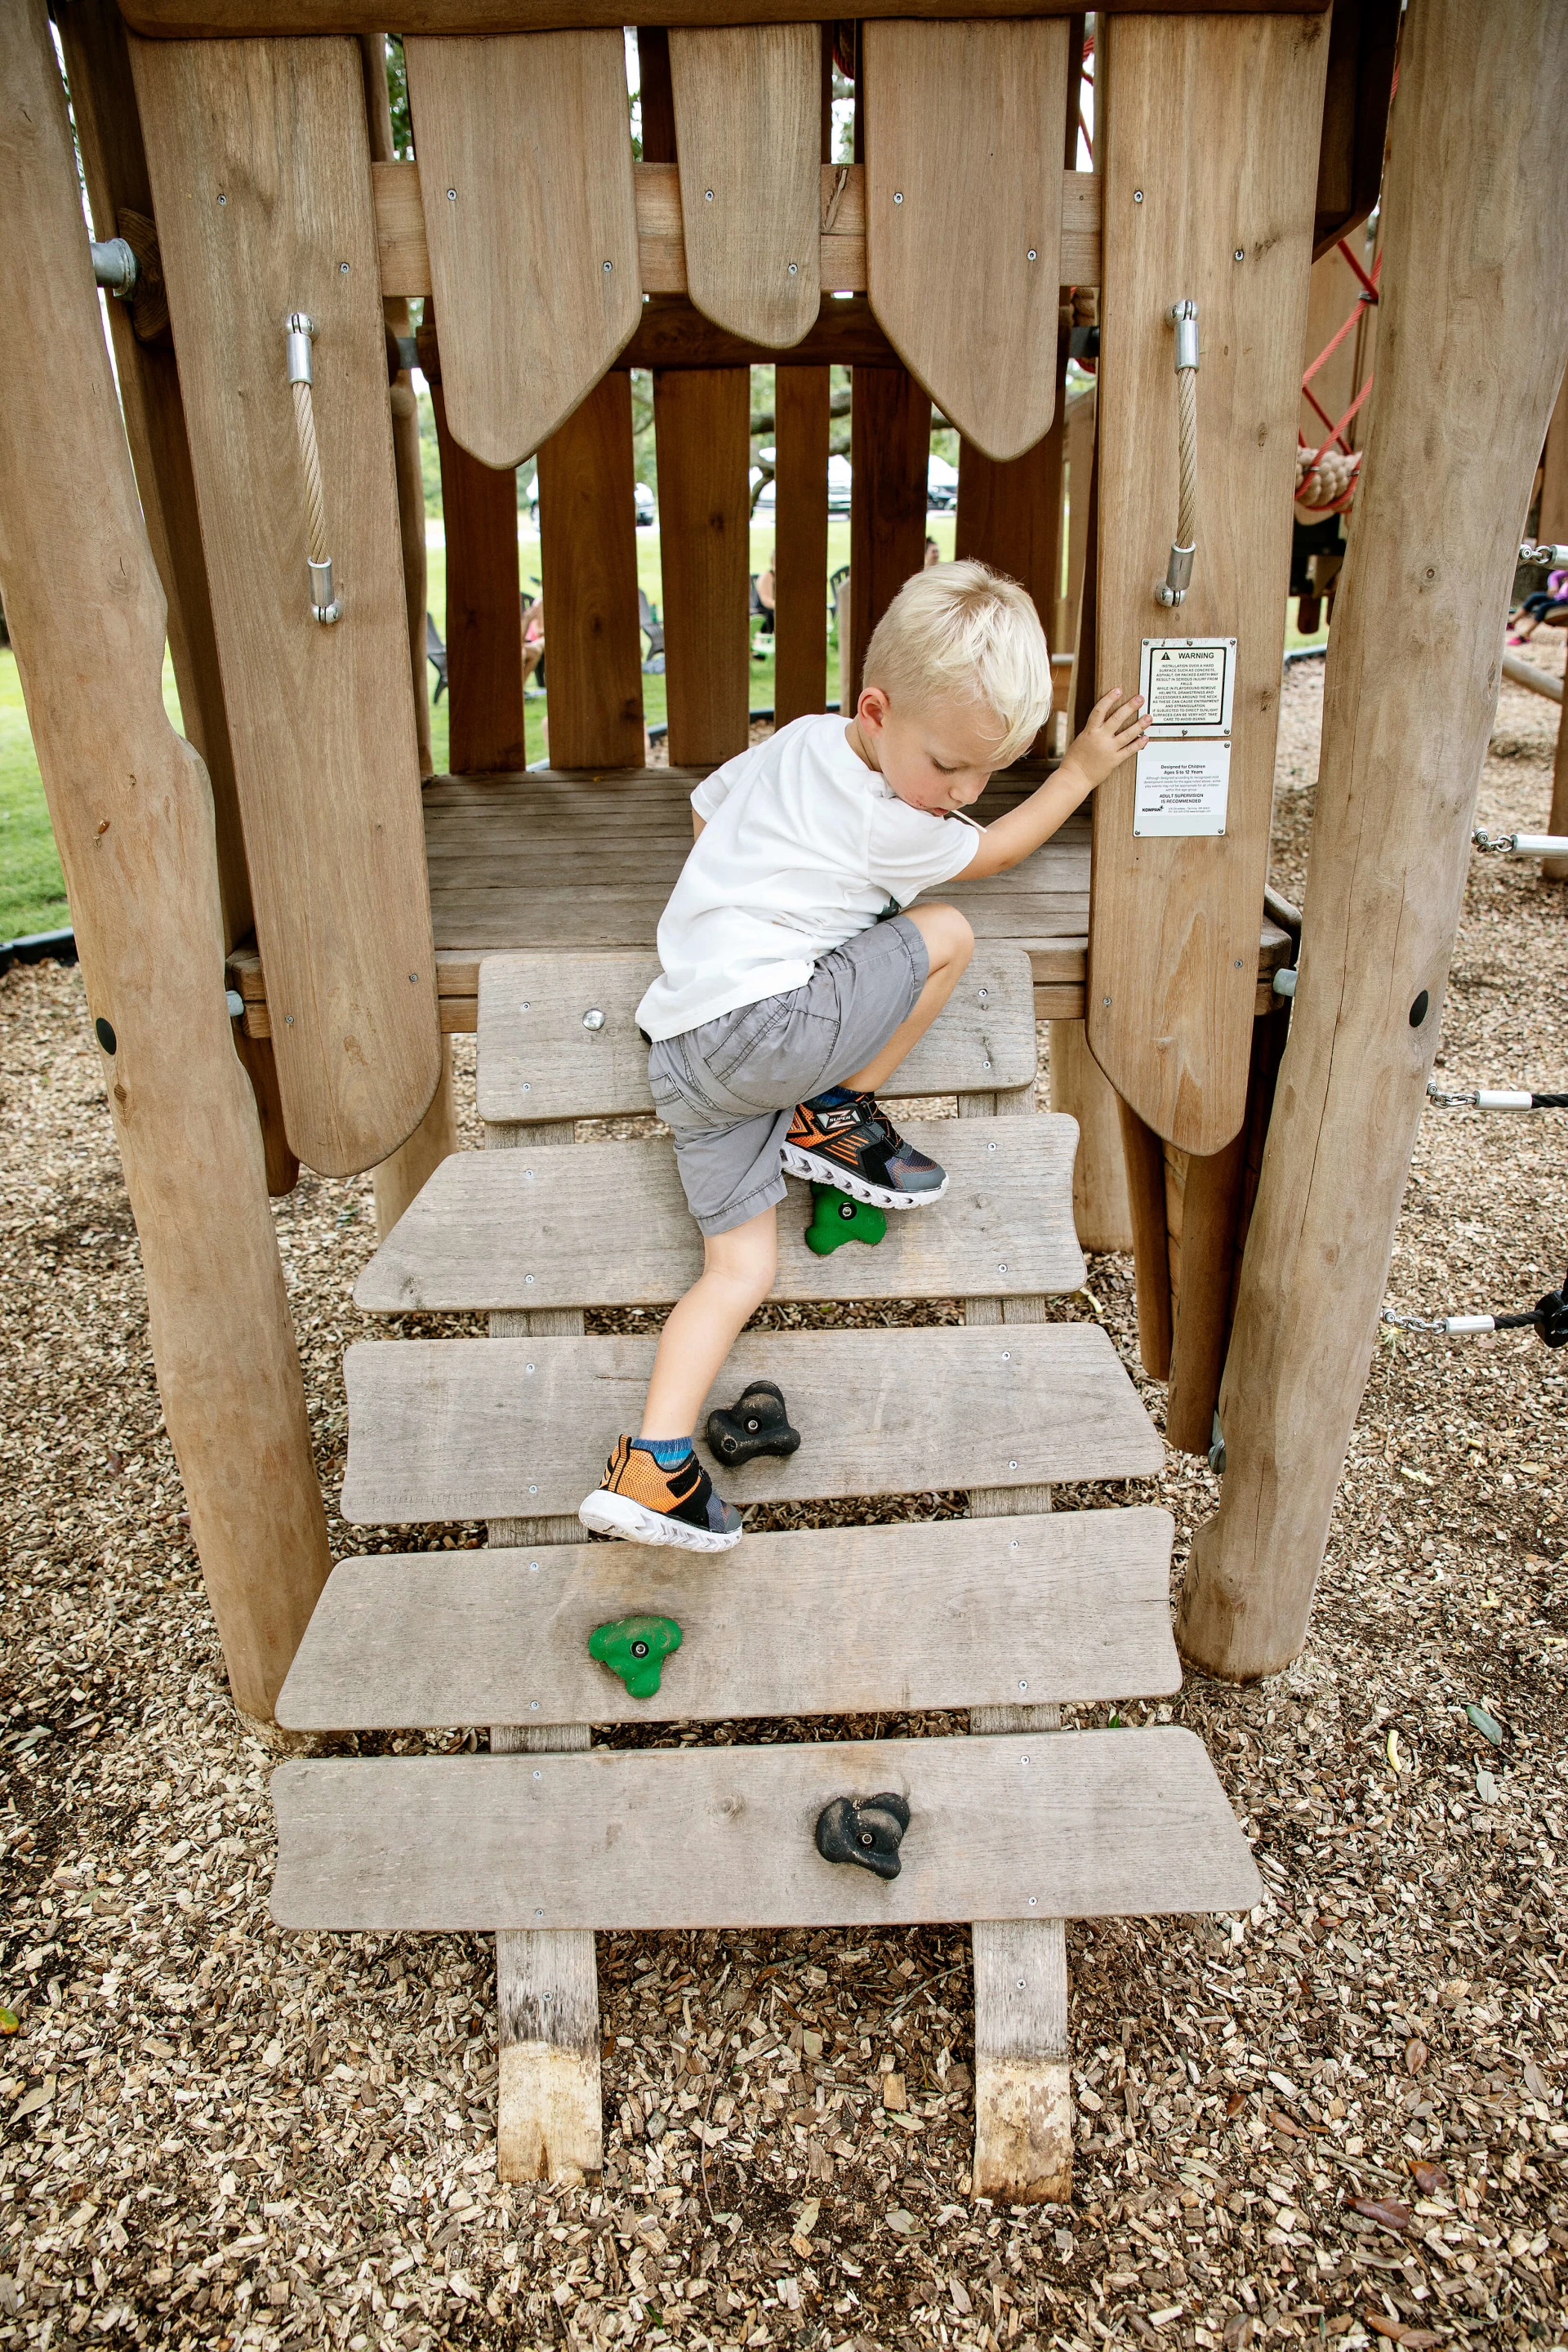 A young child climbing on wooden playground equipment